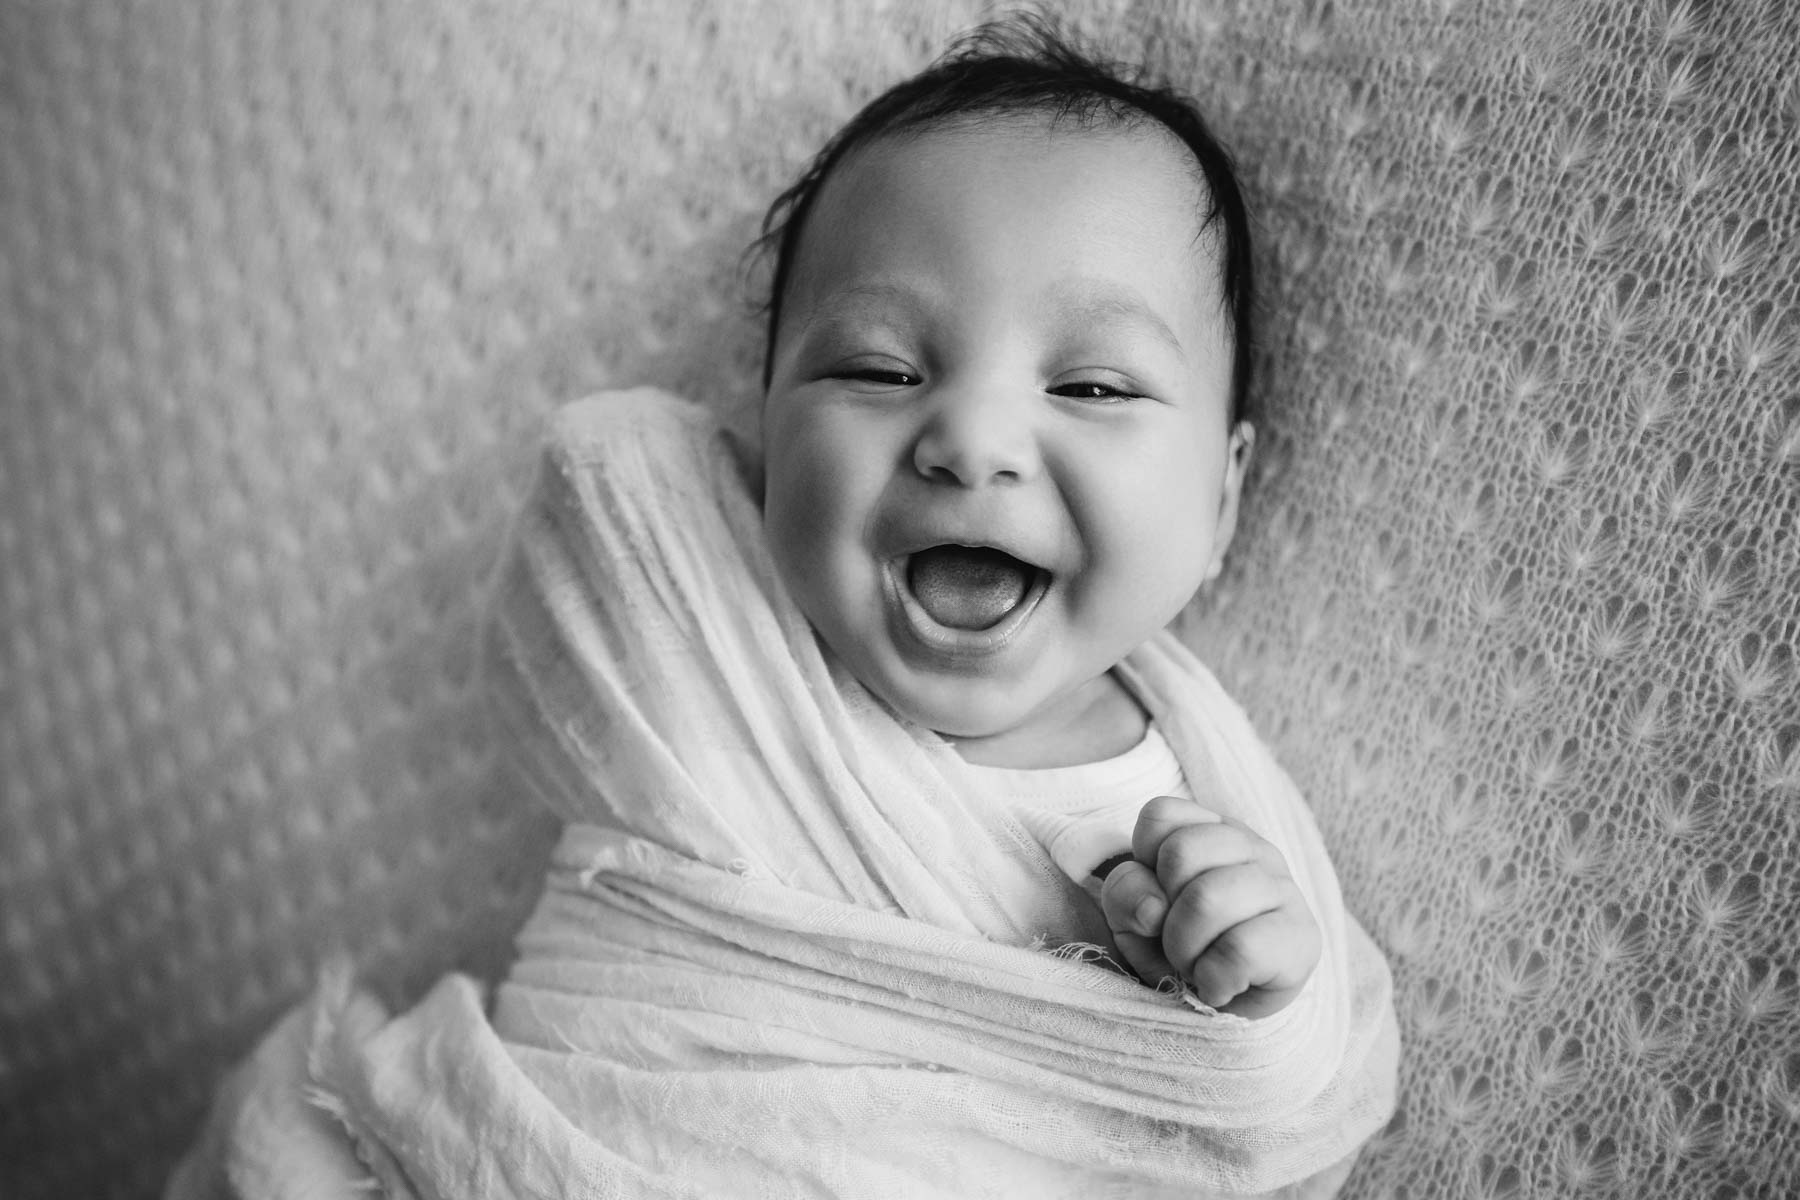 A baby boy smiles as he lays on a white rug